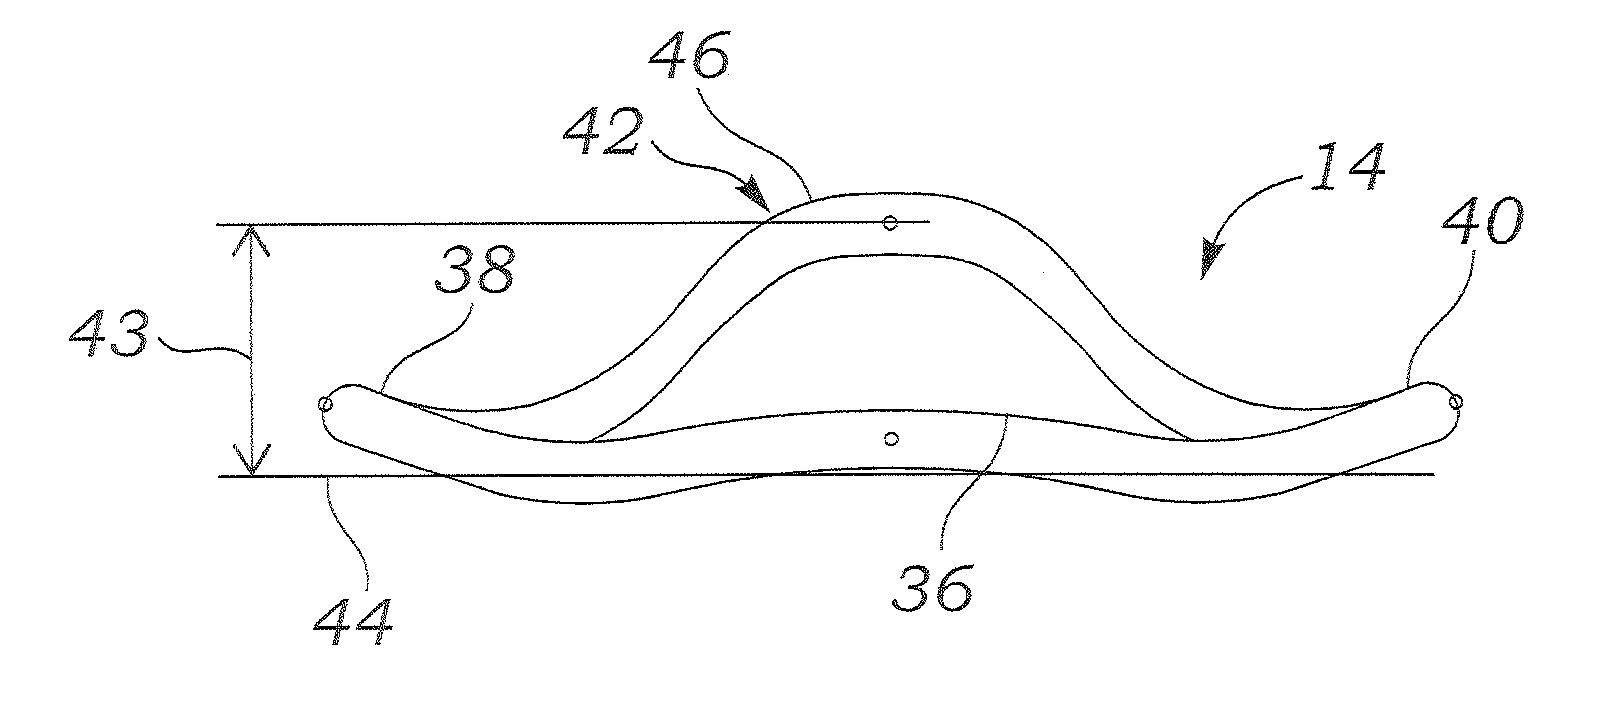 Apparatus, system, and method for delivering an annuloplasty ring